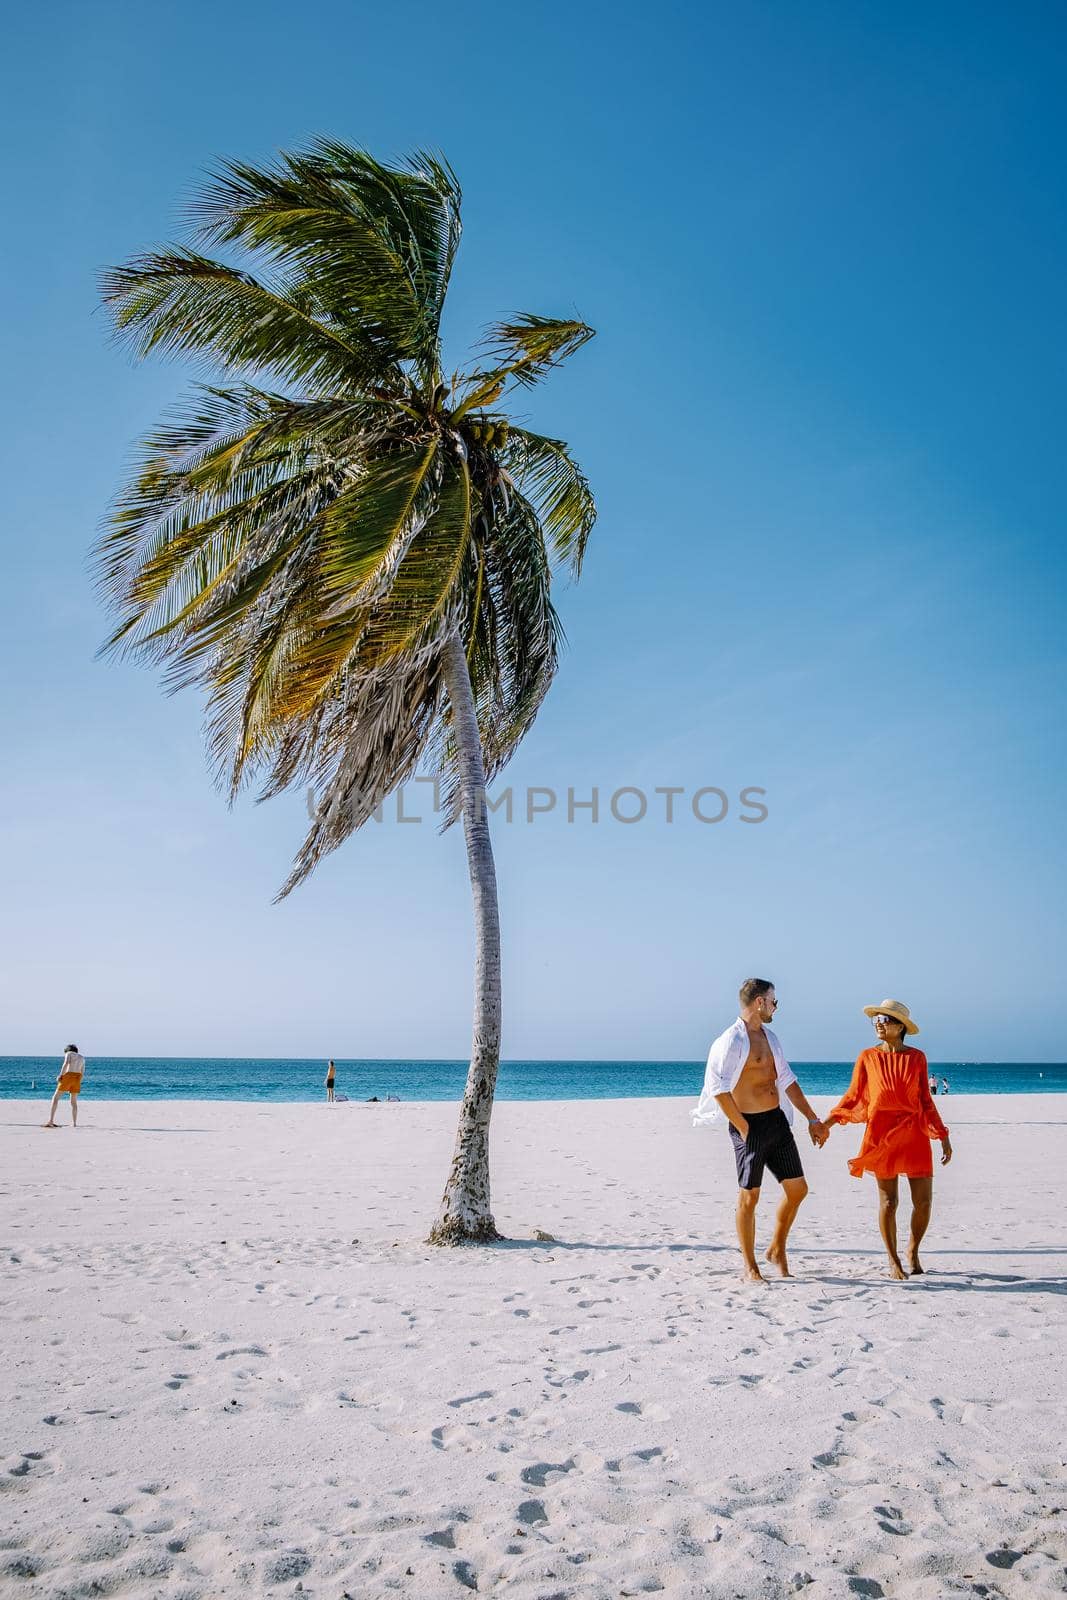 Palm Trees on the shoreline of Eagle Beach in Aruba by fokkebok